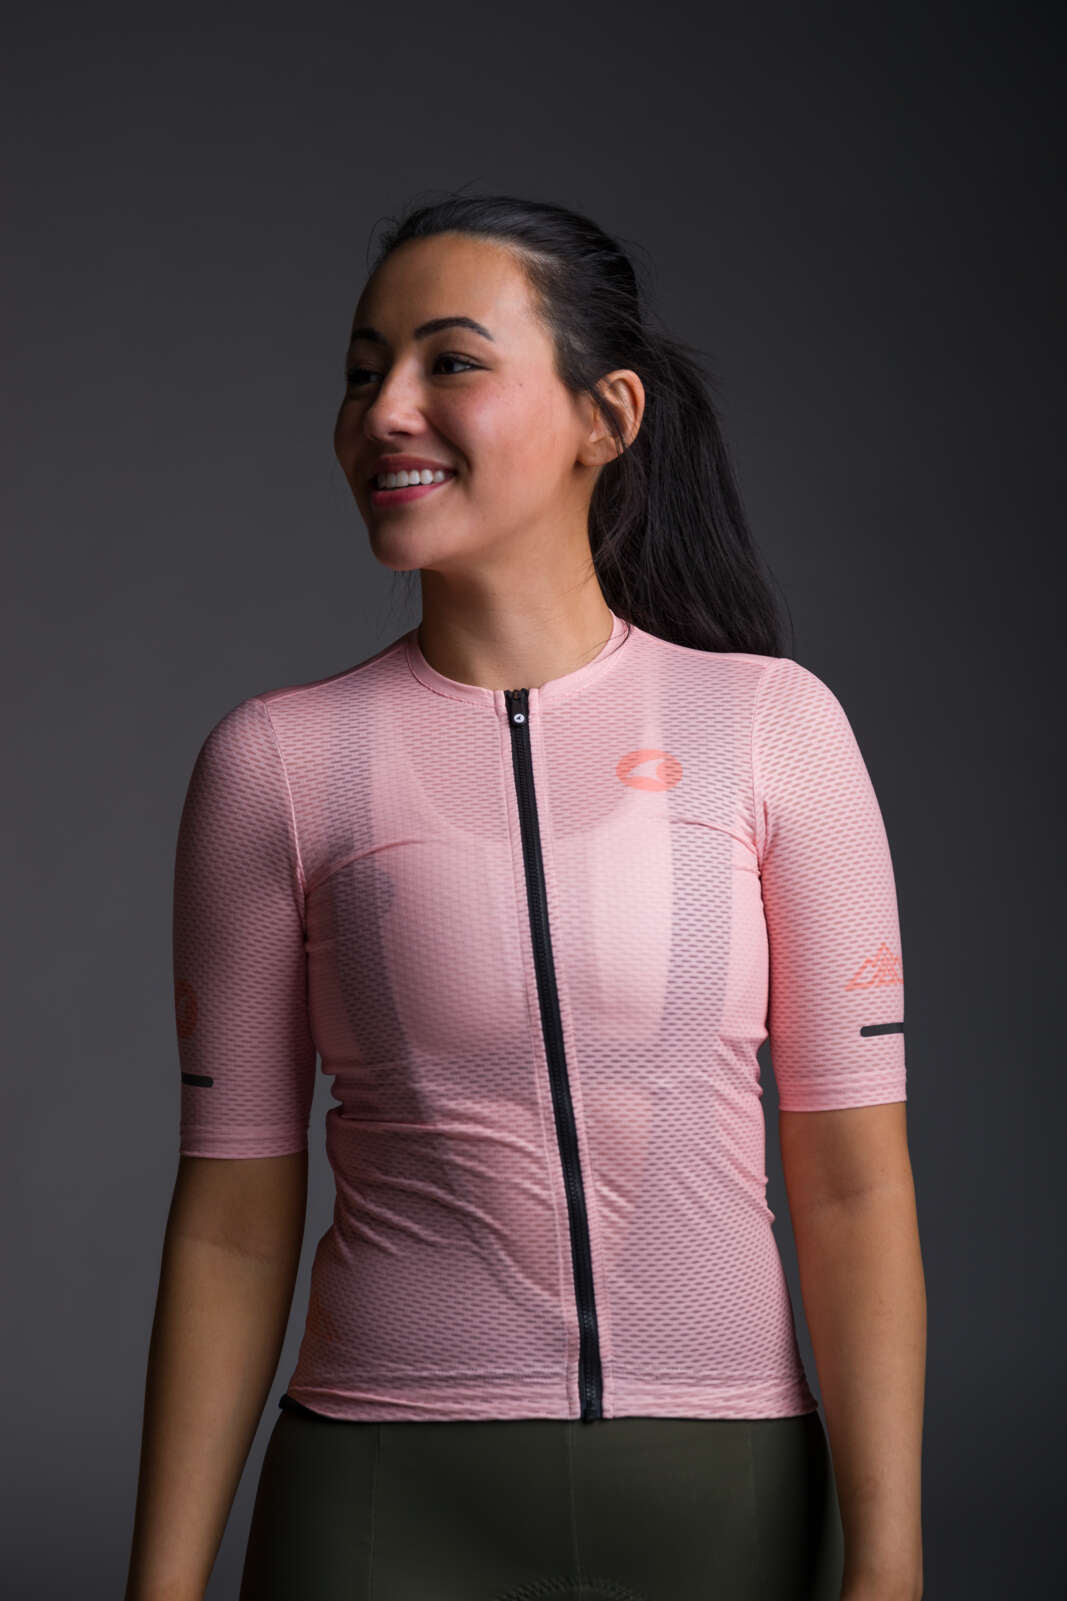 Women's Light Pink Aero Mesh Cycling Jersey  - With Olive Bibs